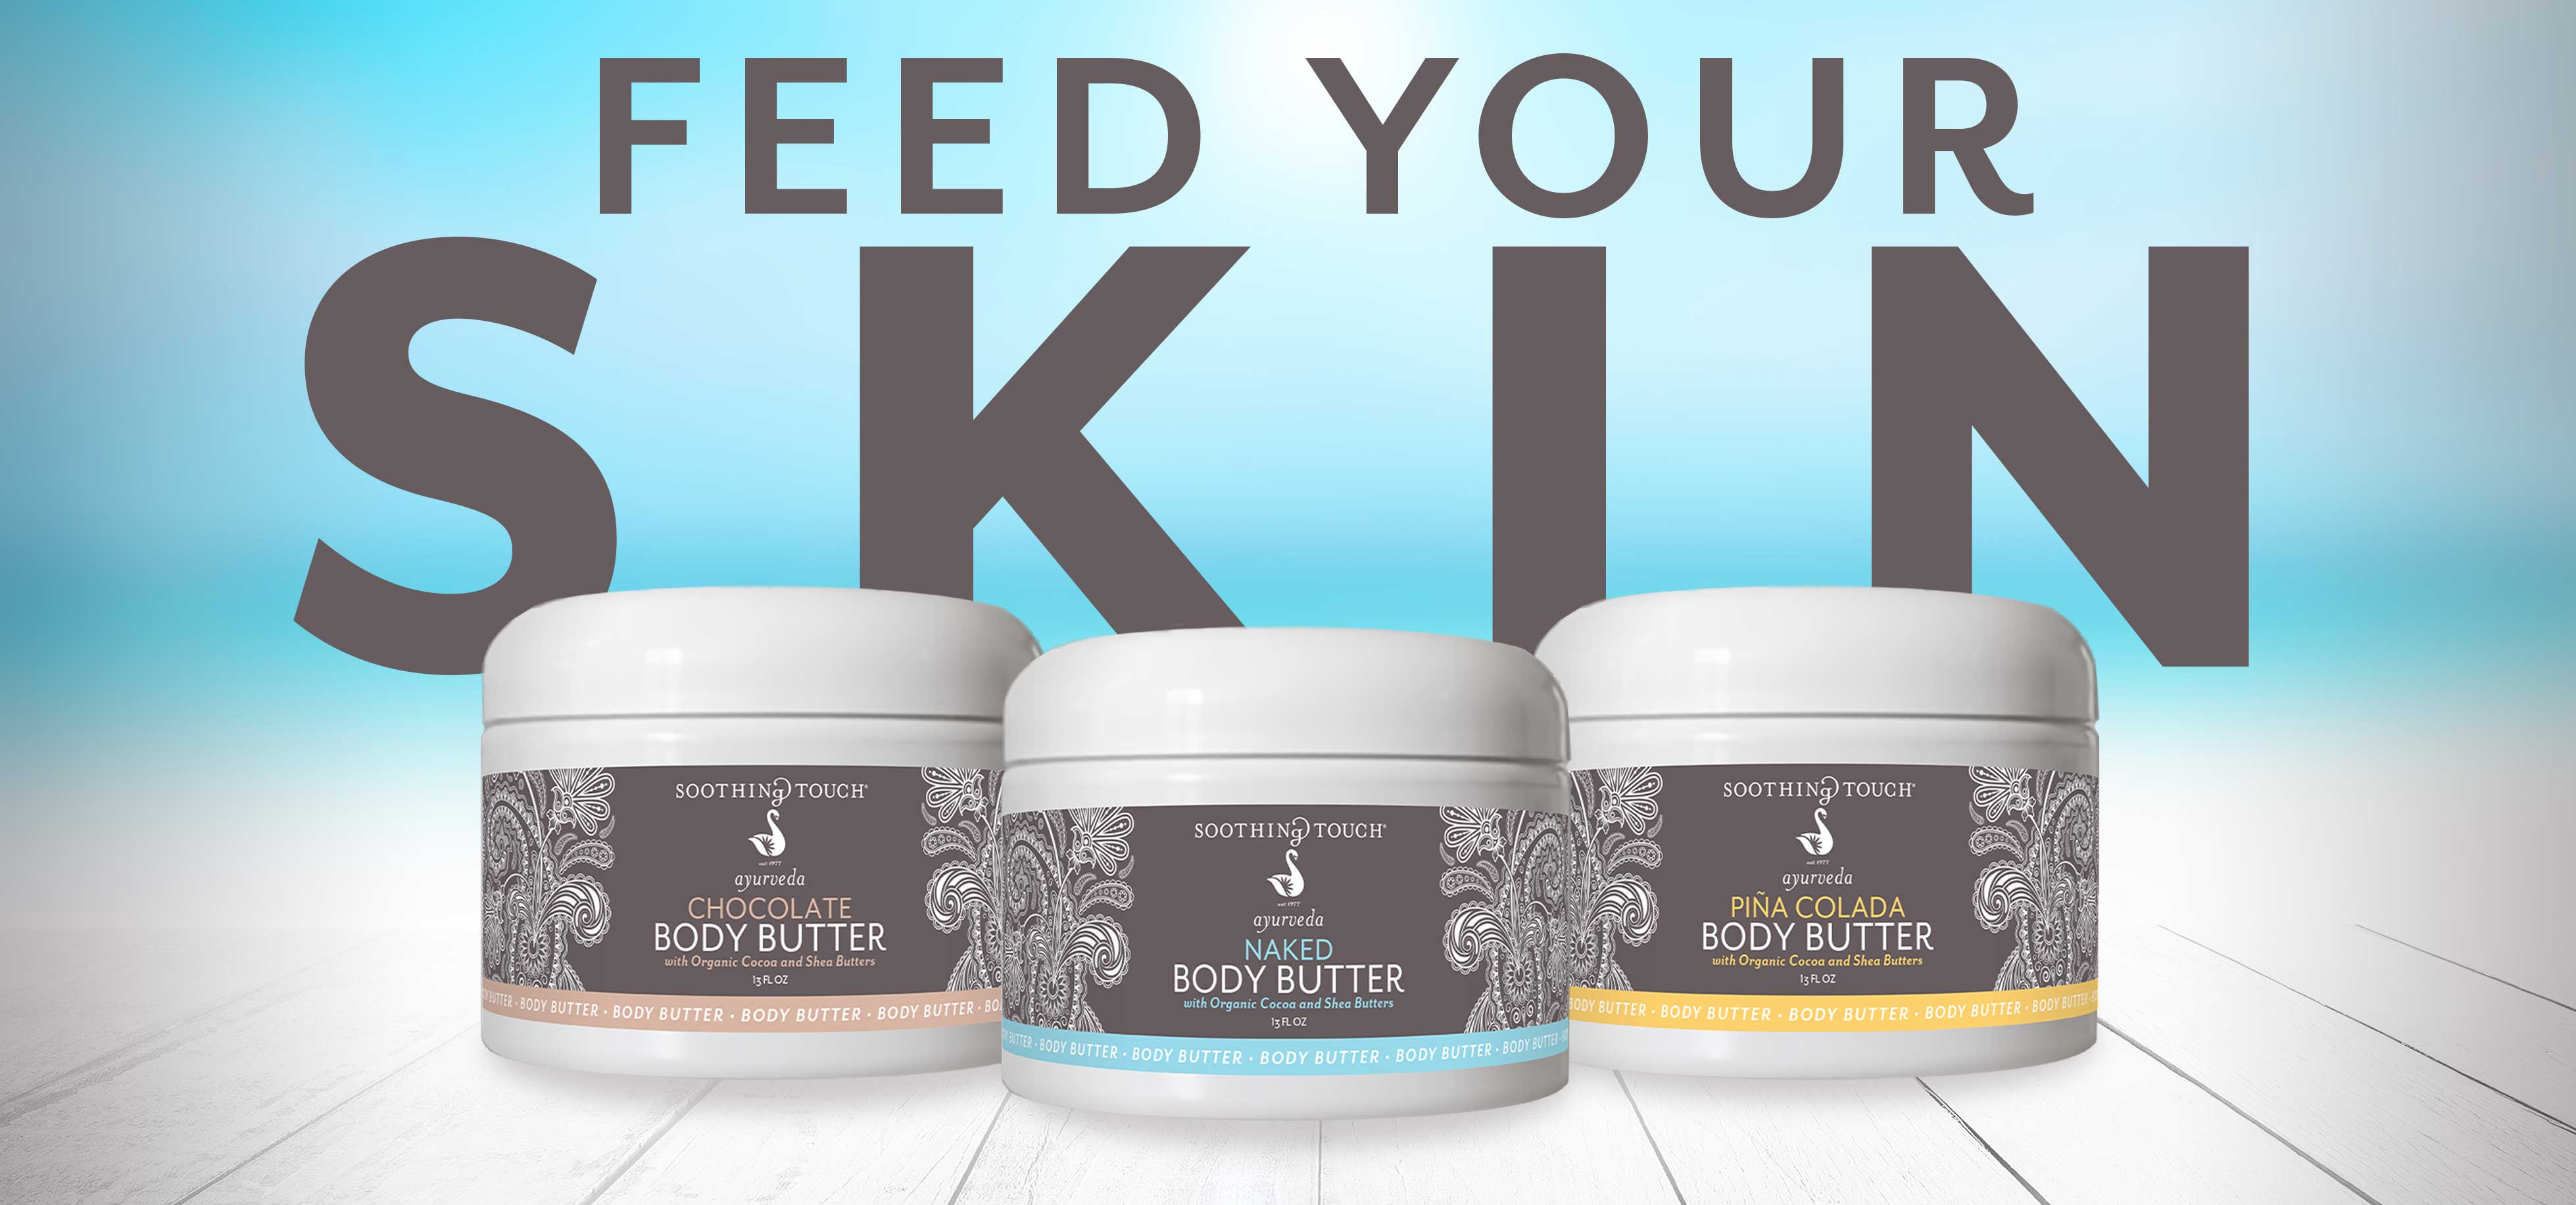 Feed your skin with Soothing Touch Body Butter